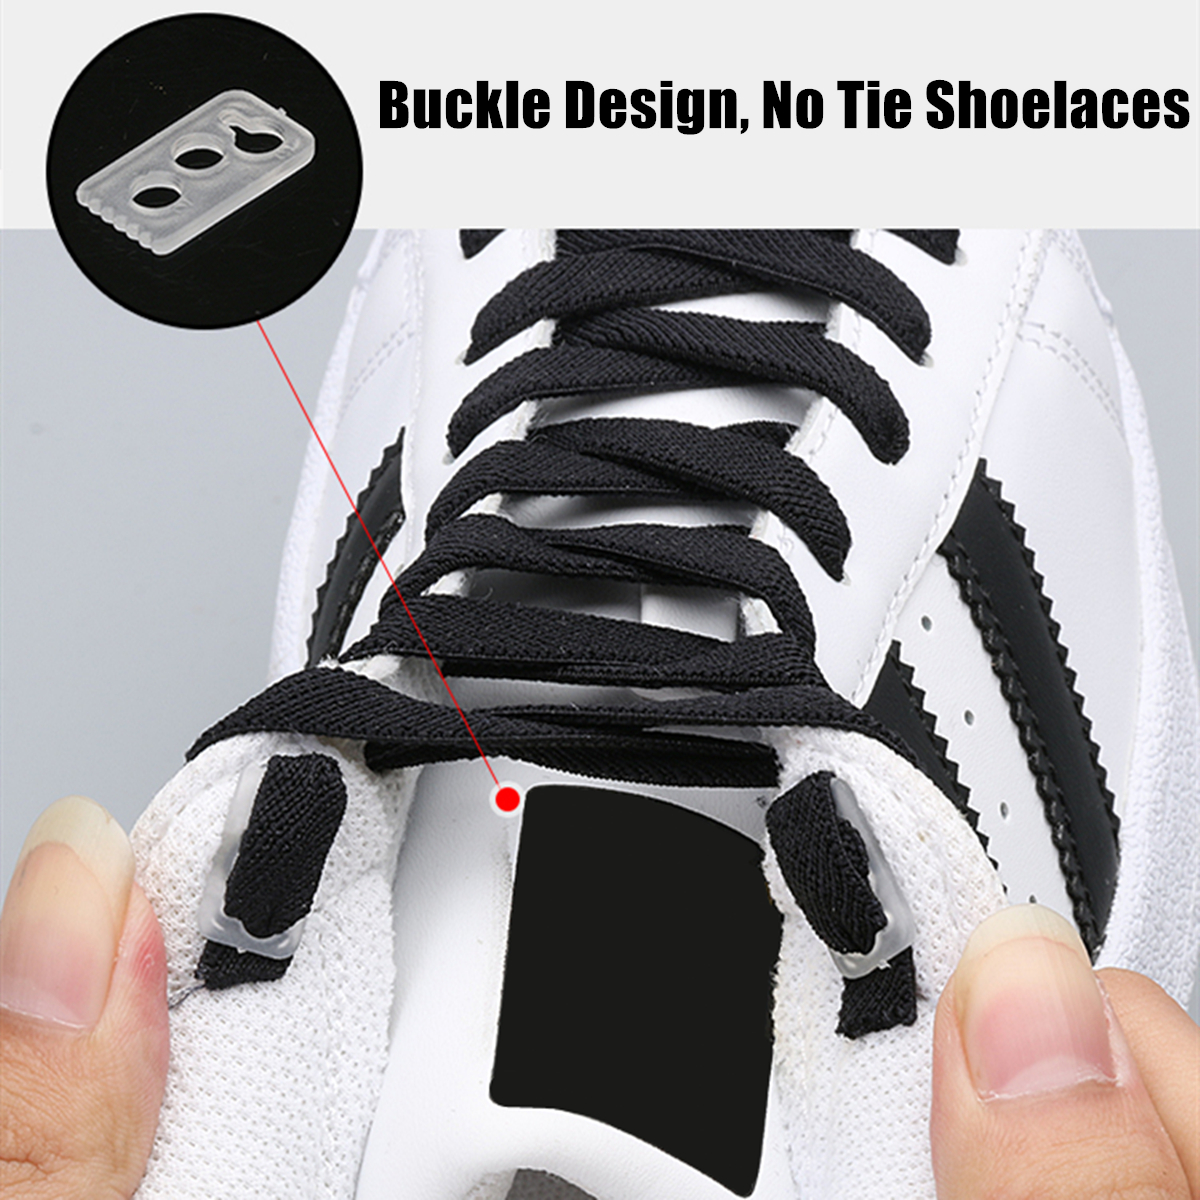 2Pcs-100cm-Elastic-No-Tie-Shoelaces-Lazy-Free-Tie-Sneaker-Laces-With-Buckles-Sports-Running-1470098-4